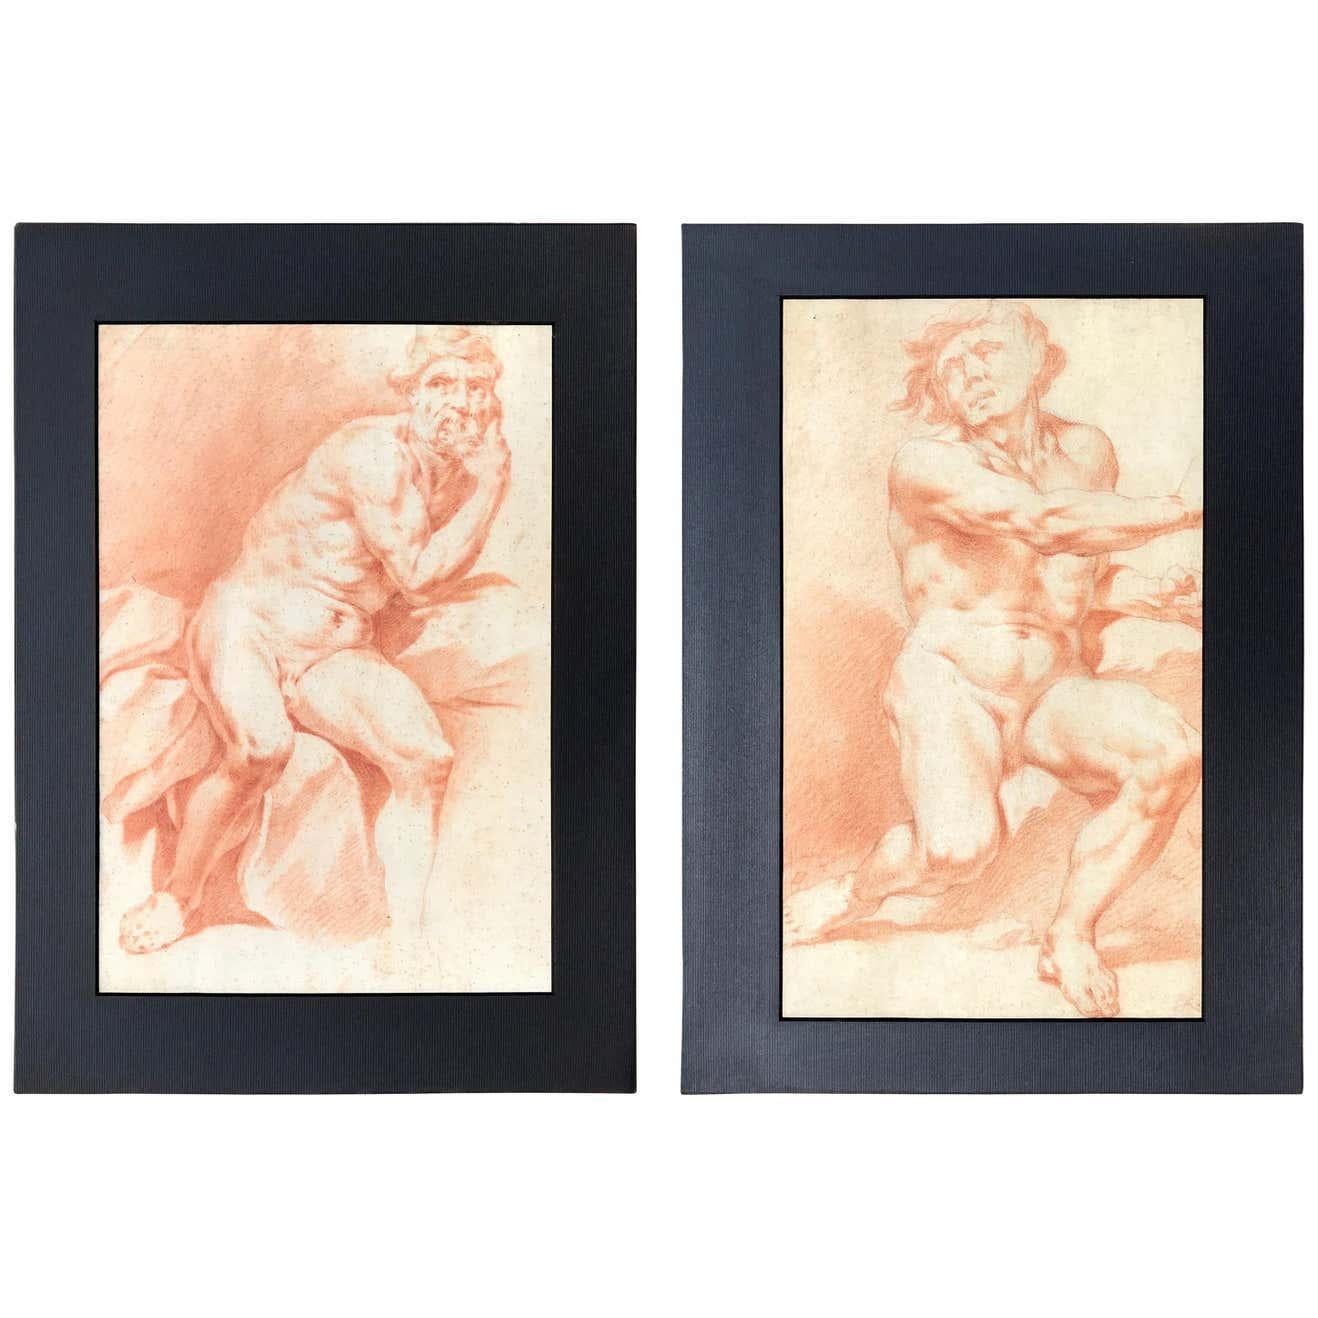 Pair of Italian Drawings after Procaccini  Academic Studies of Nude Male 1780s For Sale 3